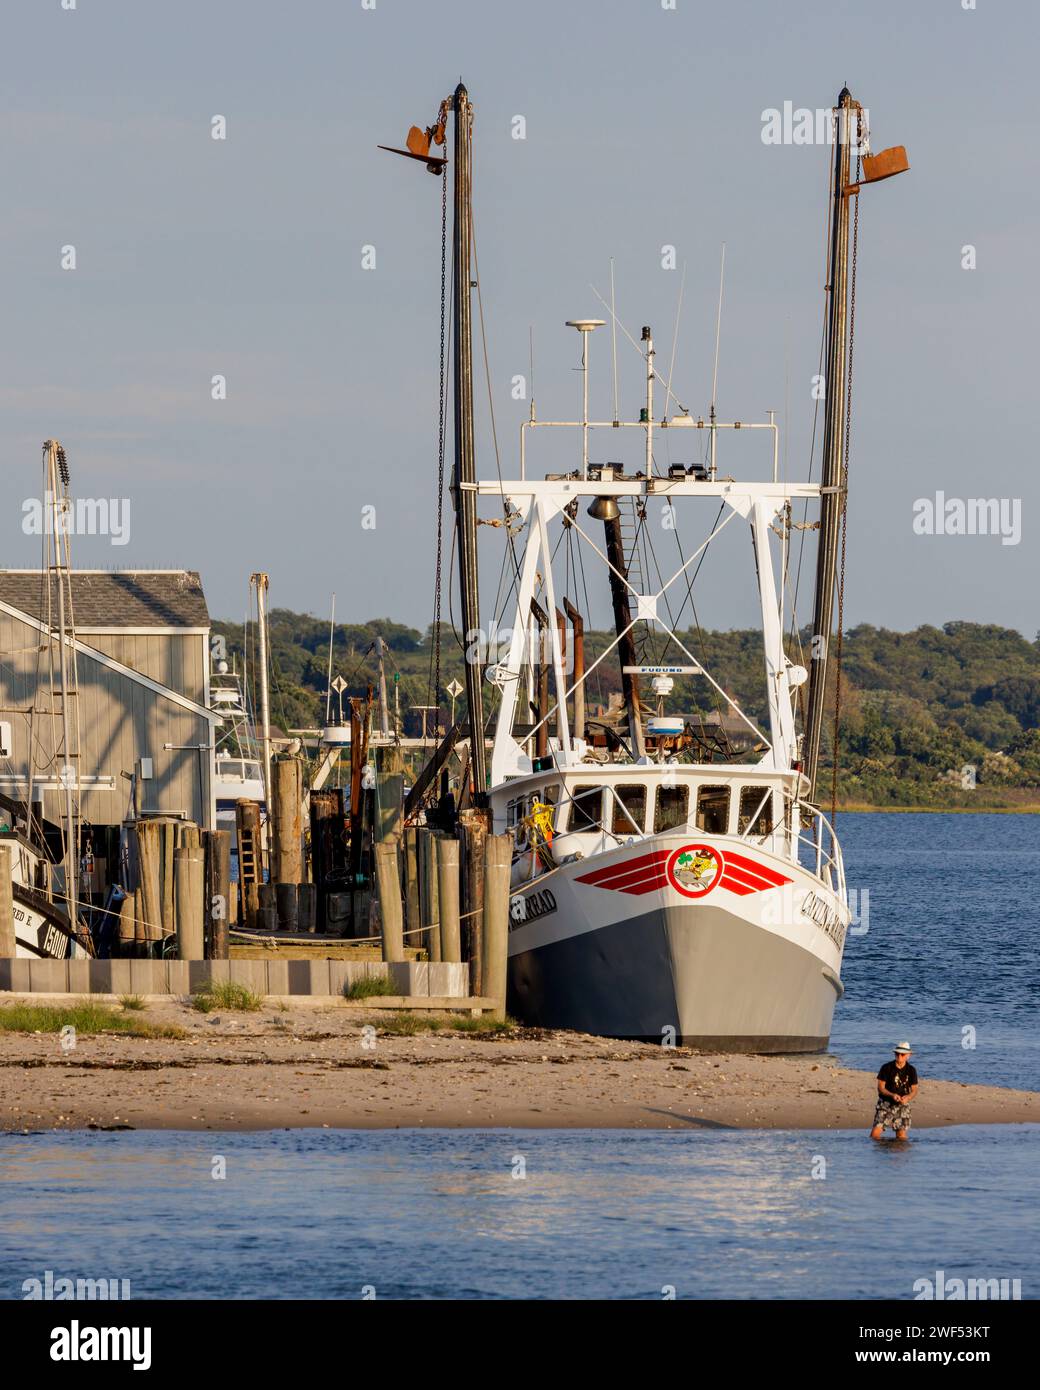 The commercial fishing Boat is moored in the harbor at Montauk, Long Island. Stock Photo